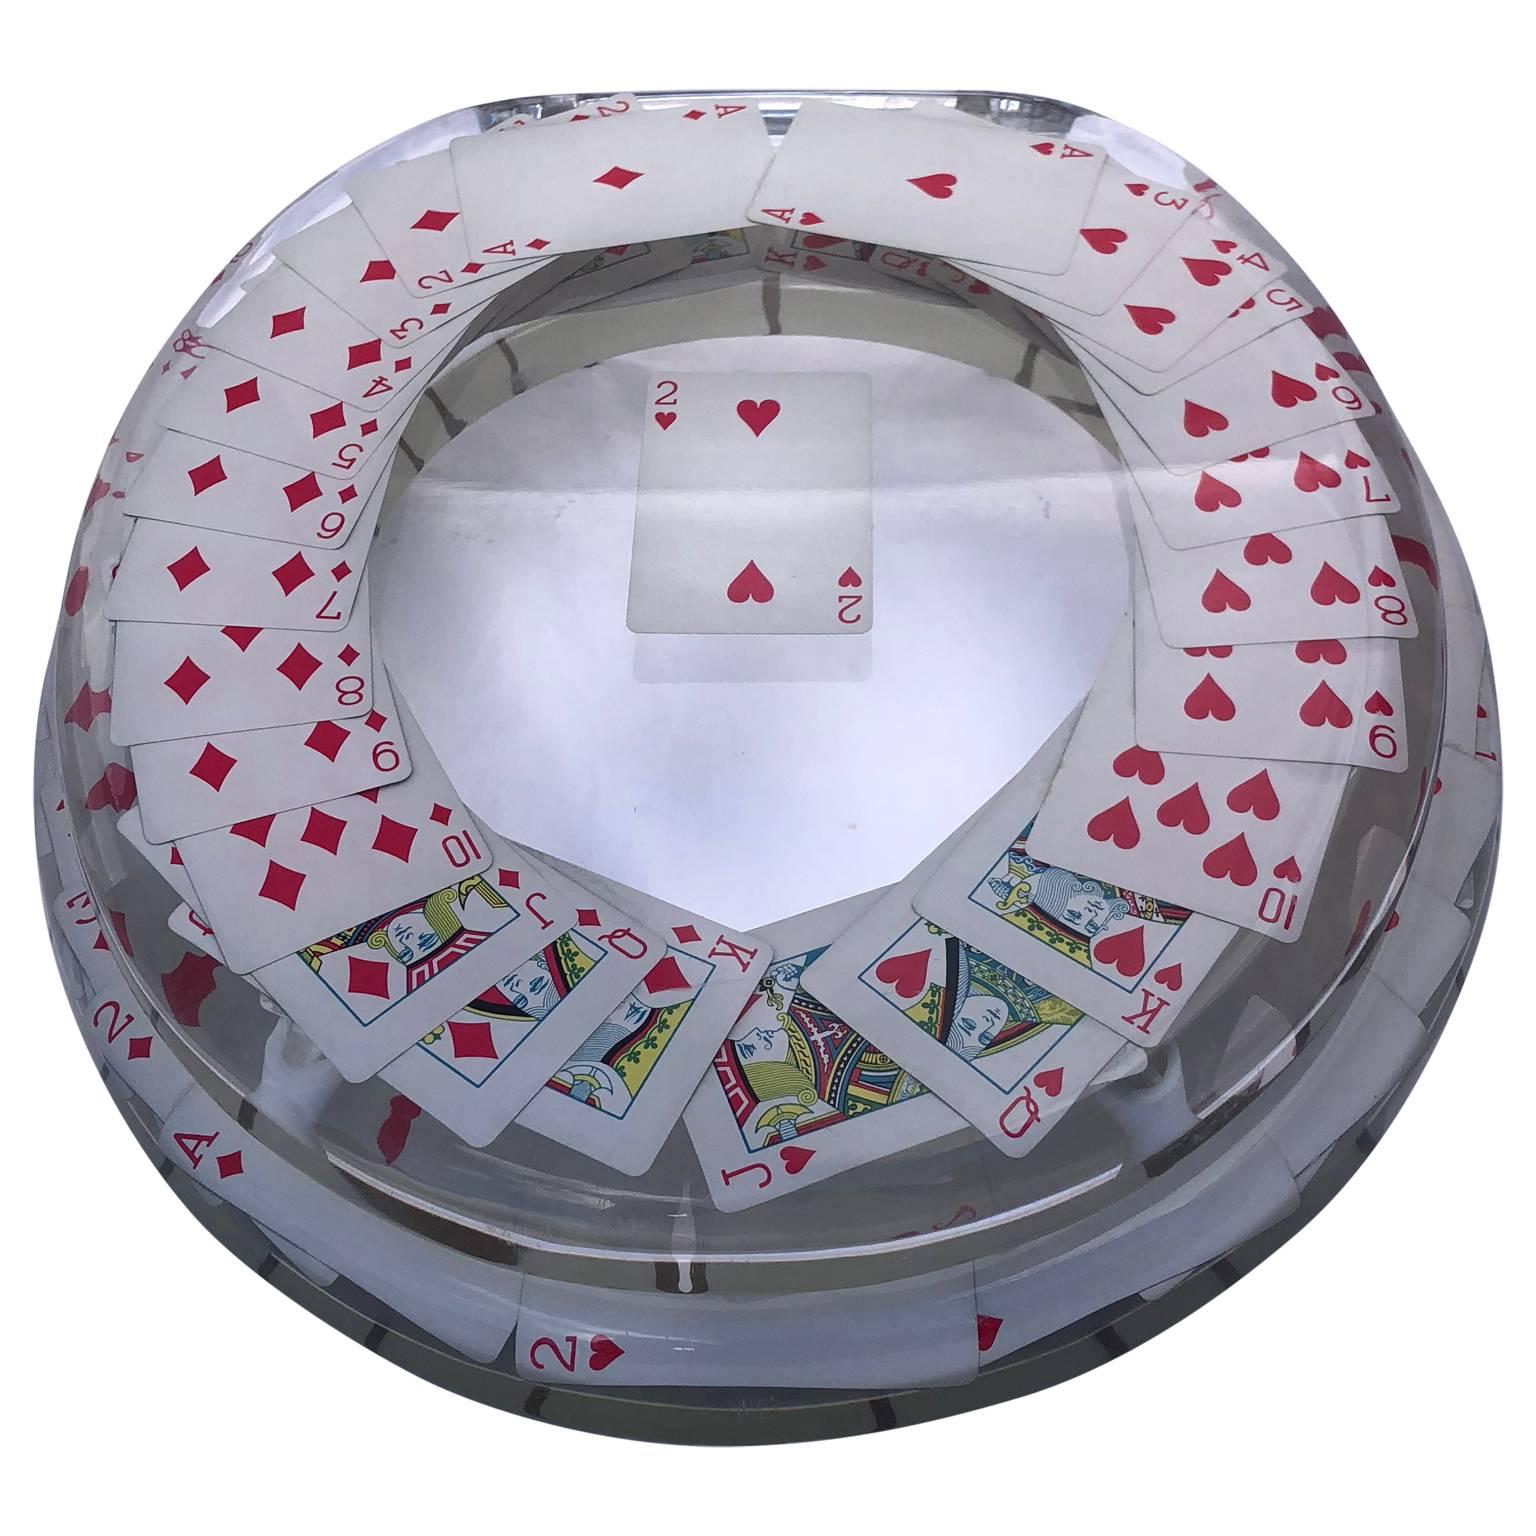 Vintage Lucite toilet seat in the red theme of deck of playing cards, hearts and diamonds.